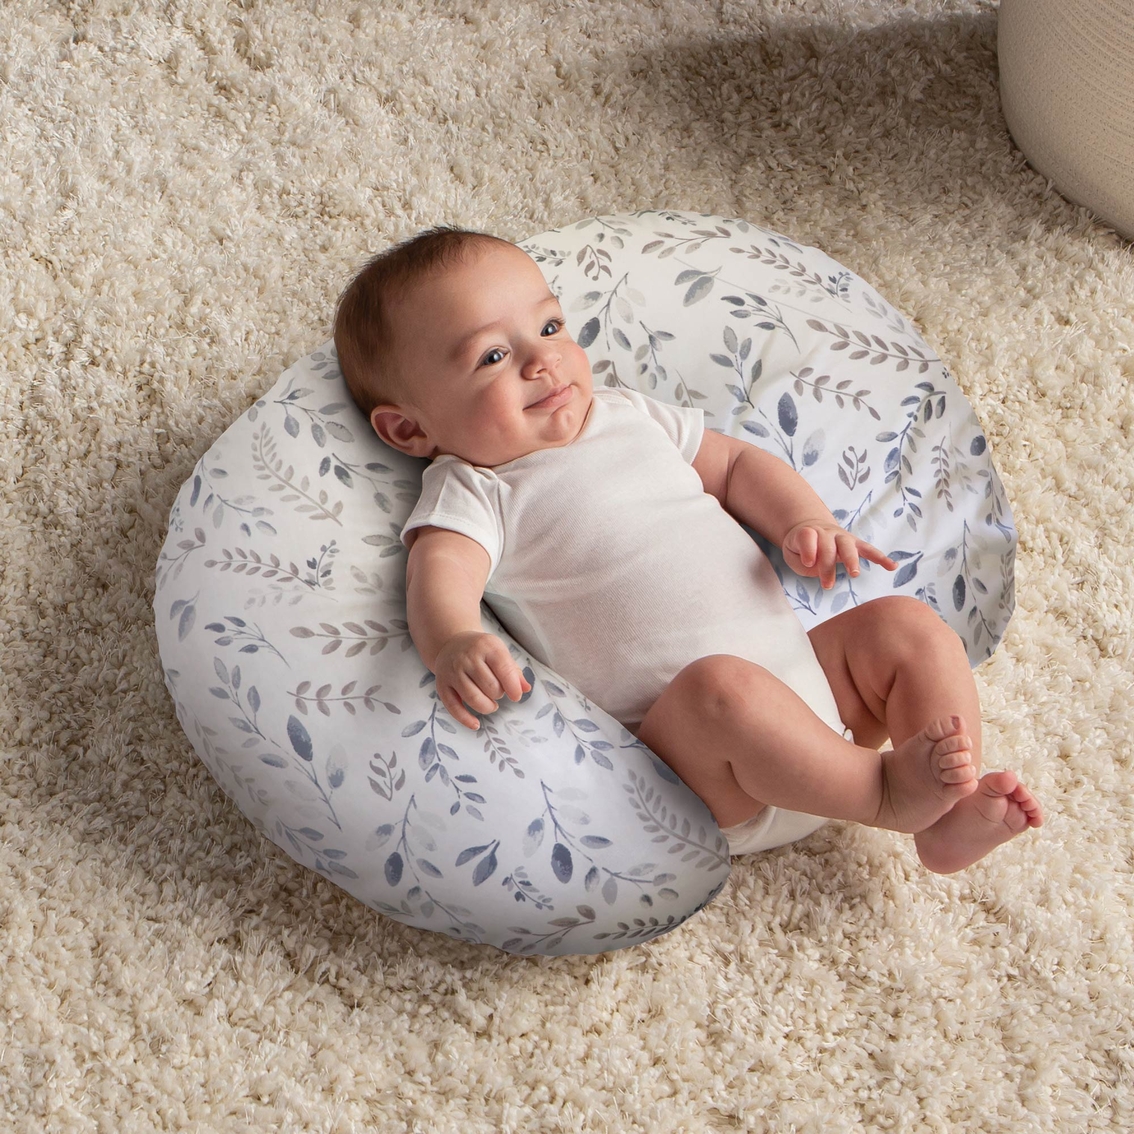 Boppy Infant Feeding and Support Pillow - Image 2 of 6